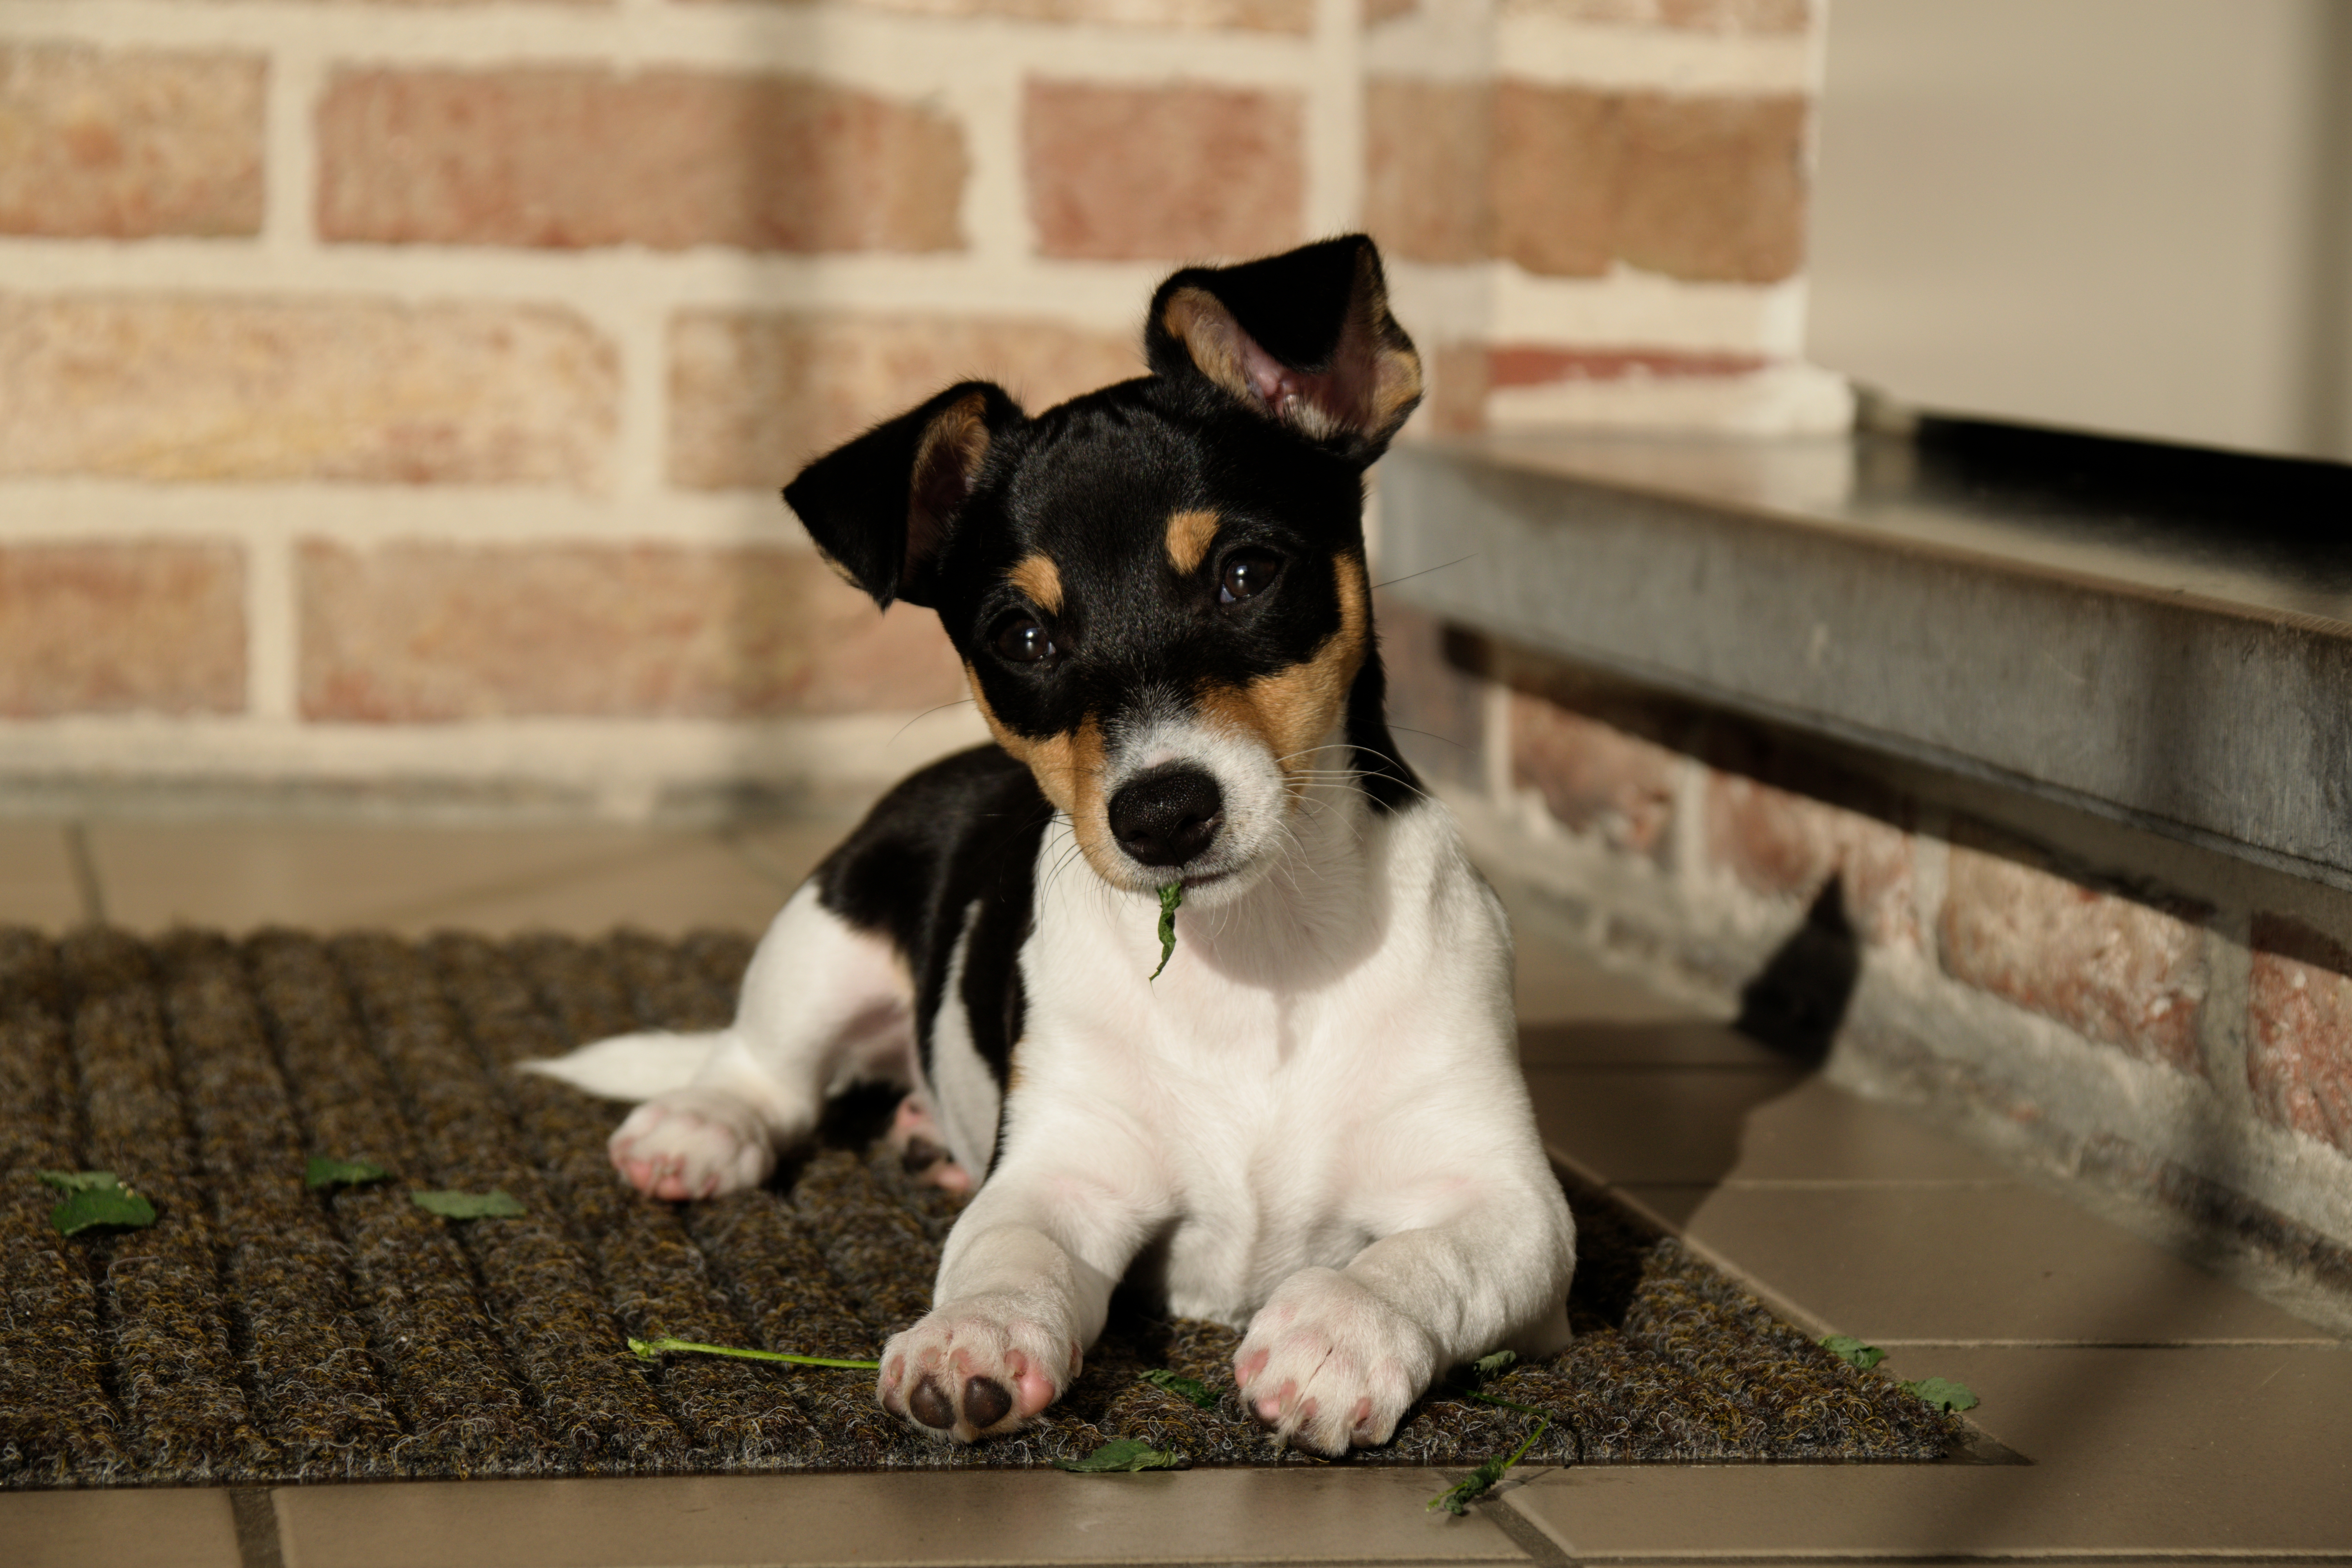 General 6000x4000 dog Jack Russell Terrier puppies